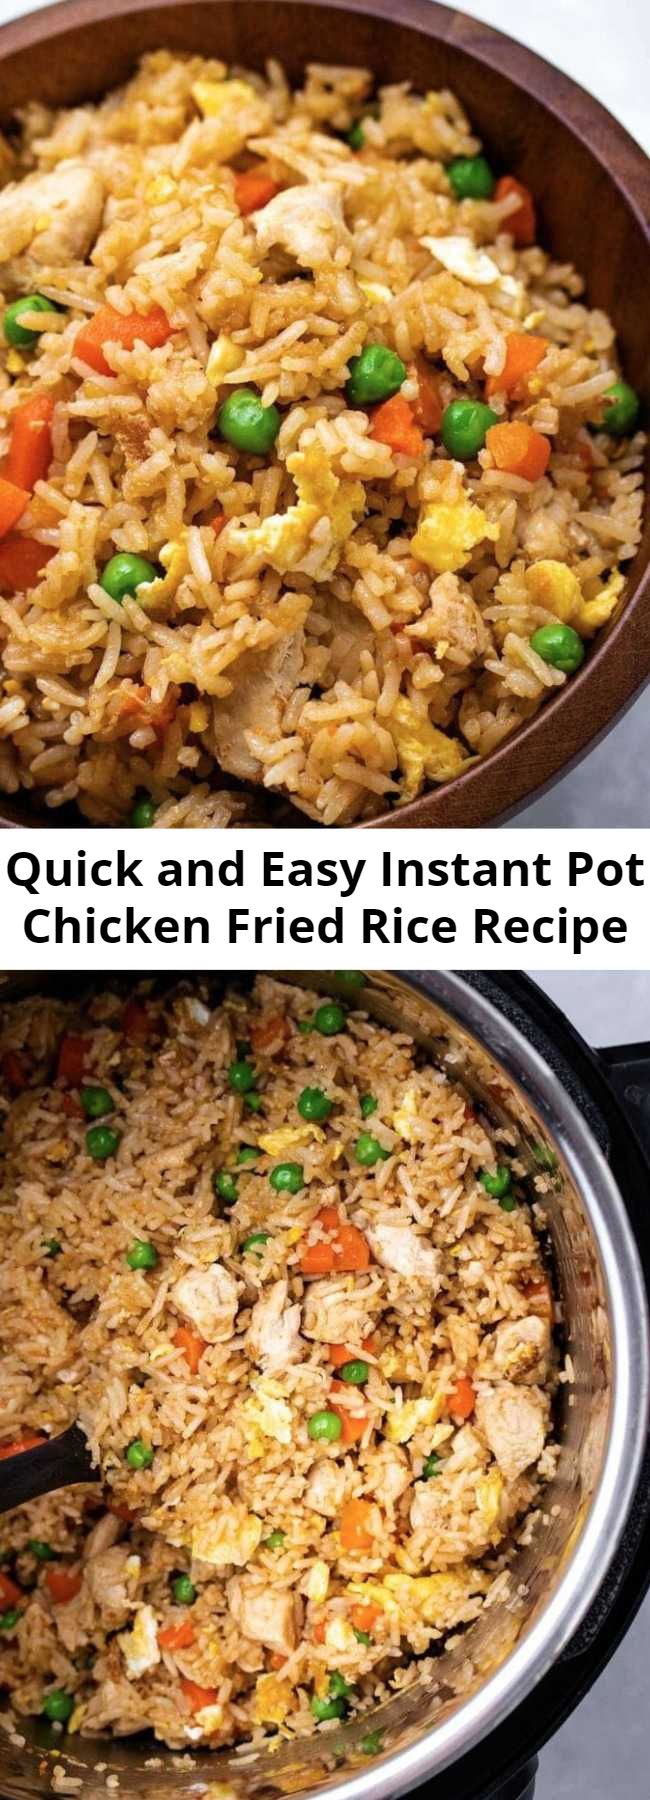 Quick and Easy Instant Pot Chicken Fried Rice Recipe - Instant Pot Chicken Fried Rice is a fast and easy one-pot meal. With simple ingredients like rice, chicken, egg, carrots and peas, your family will love this savory recipe! Perfect for a weeknight dinner or meal prep lunch!